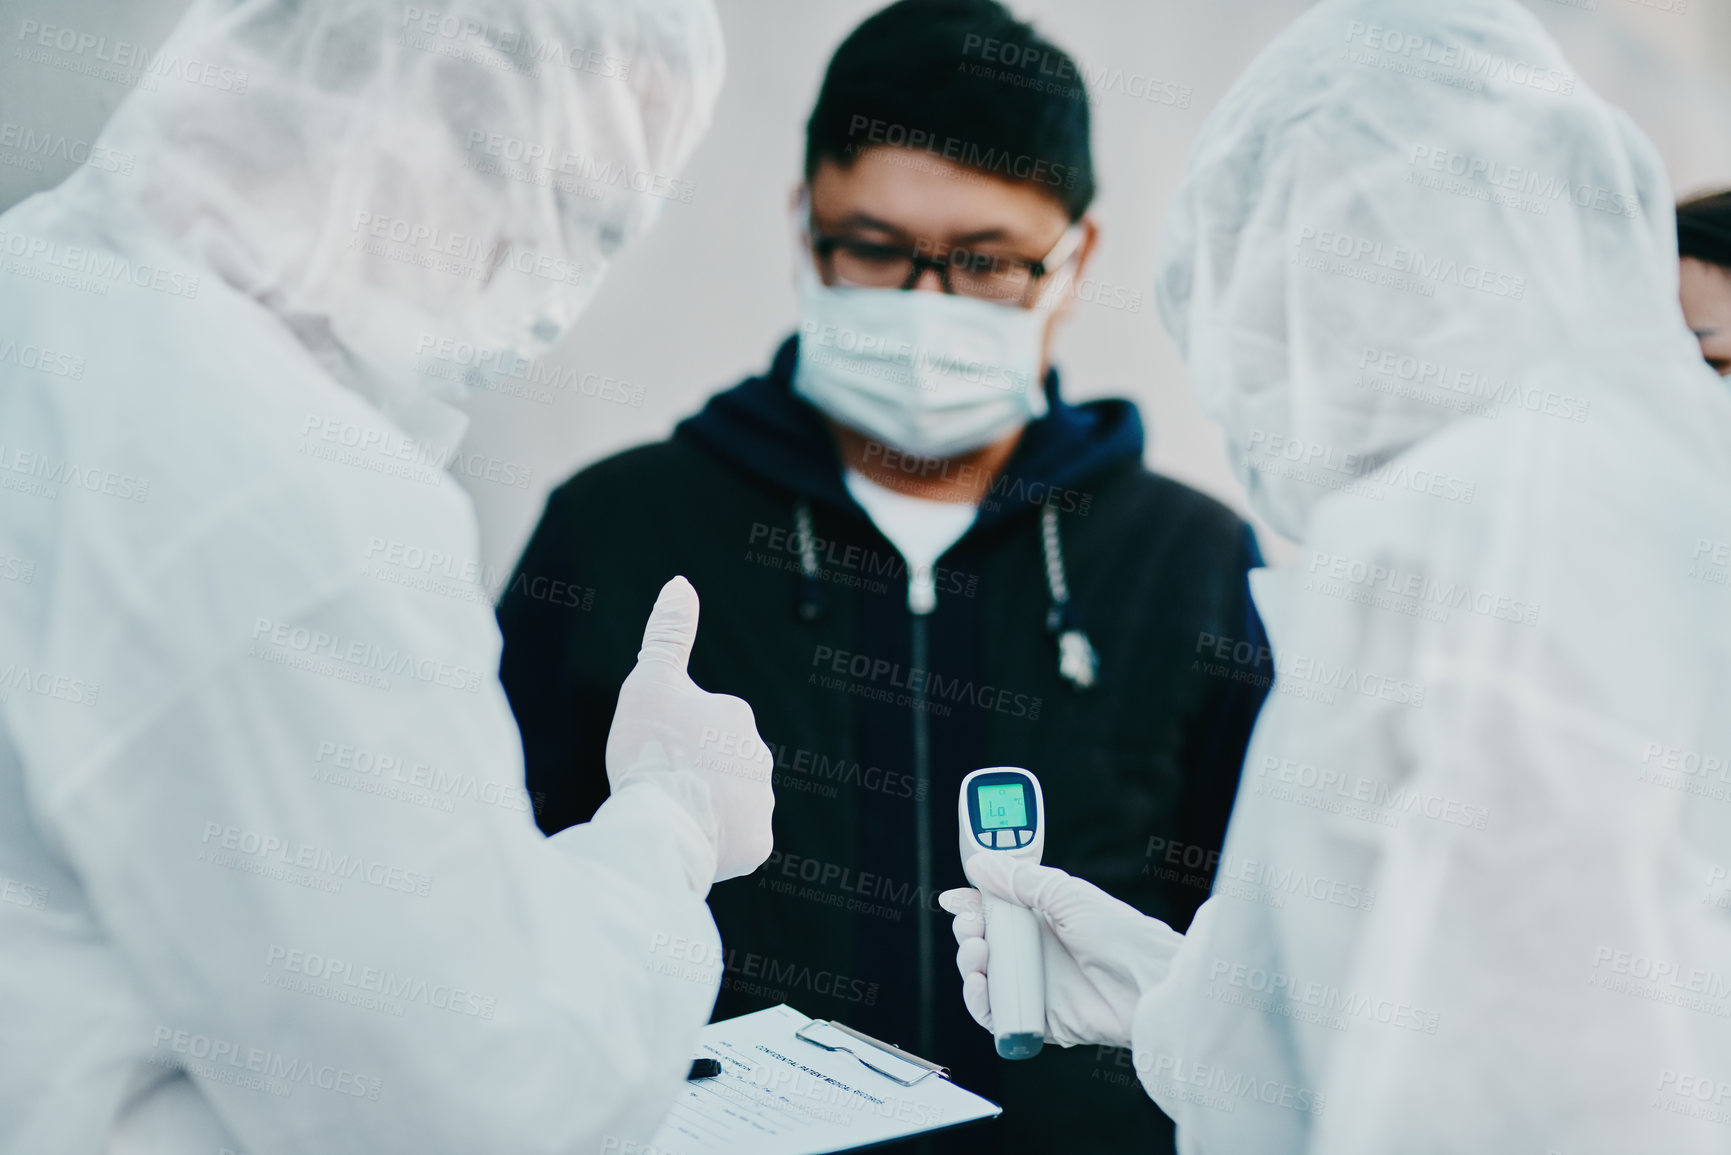 Buy stock photo Negative covid test and thumbs up for young man from healthcare worker after testing for virus. Medical professionals in hazmat suits taking temperature tests during disease outbreak or pandemic